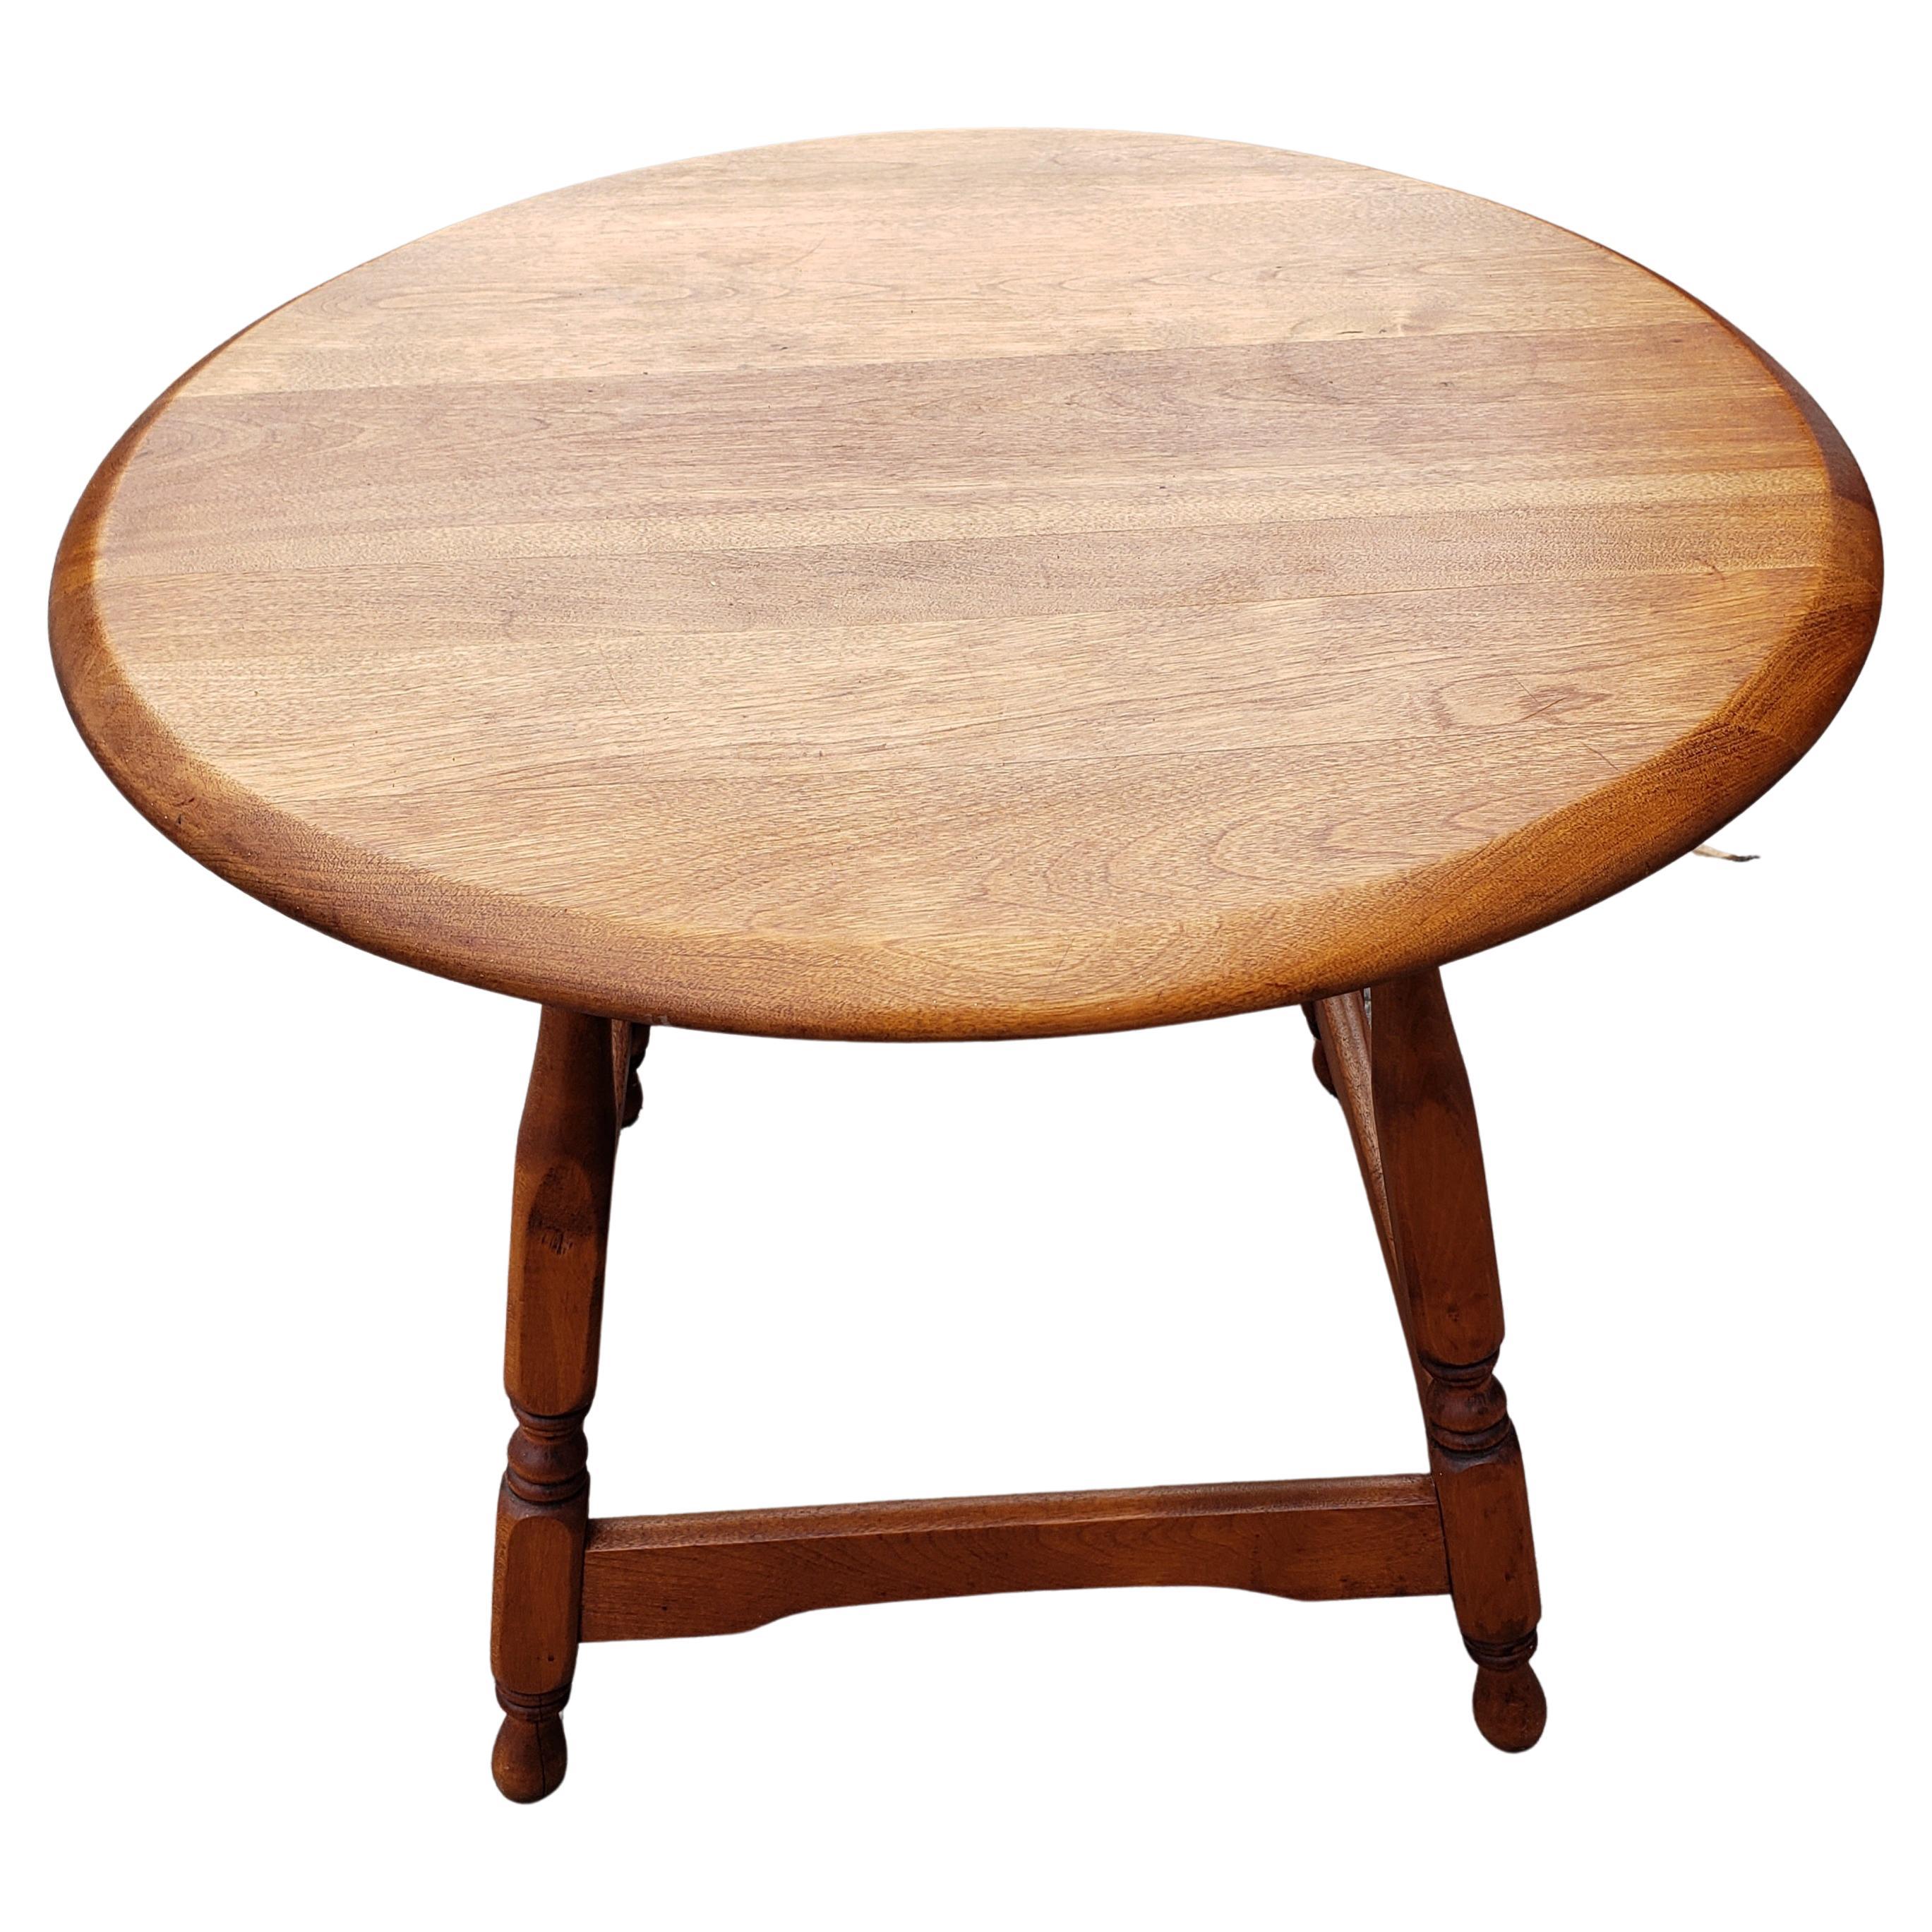 Amish hand crafted solid red oak wood desert table side table, Circa 1970s. Made in Amish Country in Lancaster, Pennsylvania. Measurements are 24.5